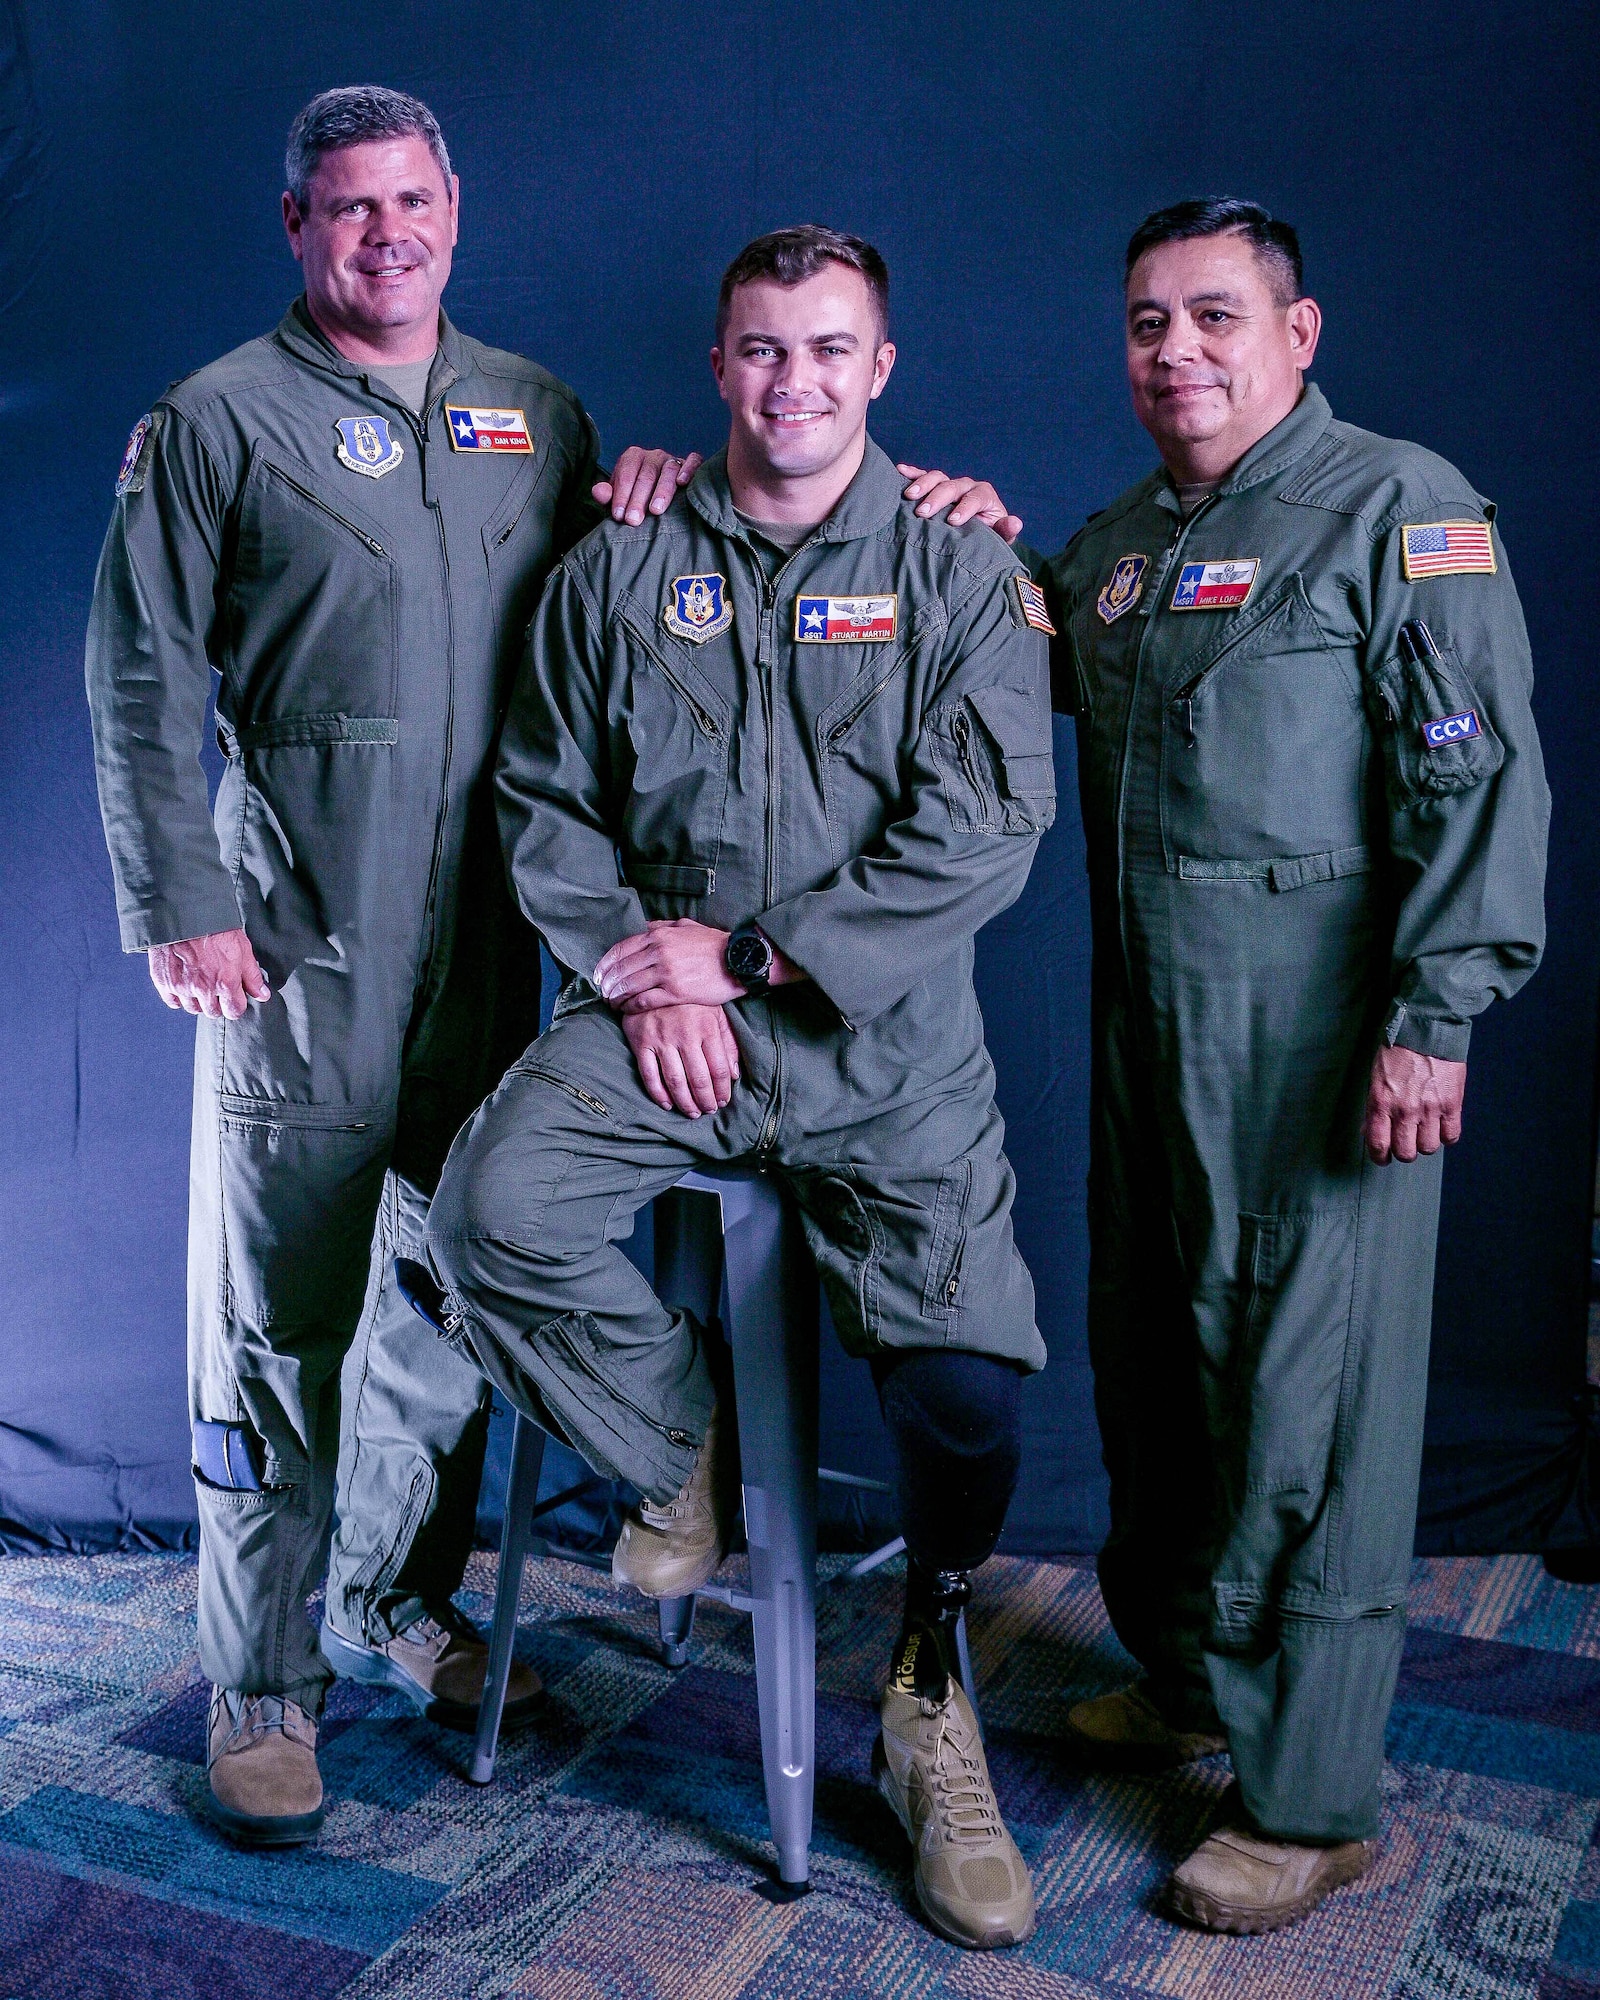 Staff Sgt. Stuart Martin, loadmaster (center), with his commander, Lt. Col. Daniel King (left), and his supervisor, Master Sgt. Michal Lopez, both with the 68th Airlift Squadron, Joint Base San Antonio-Lackland, Texas. King and Lopez were instrumental in Martin’s journey to return to flying status as a loadmaster on the C-5M super Galaxy following a motorcycle accident in May 2017. (U.S. Air Force Photo by Drew Patterson)